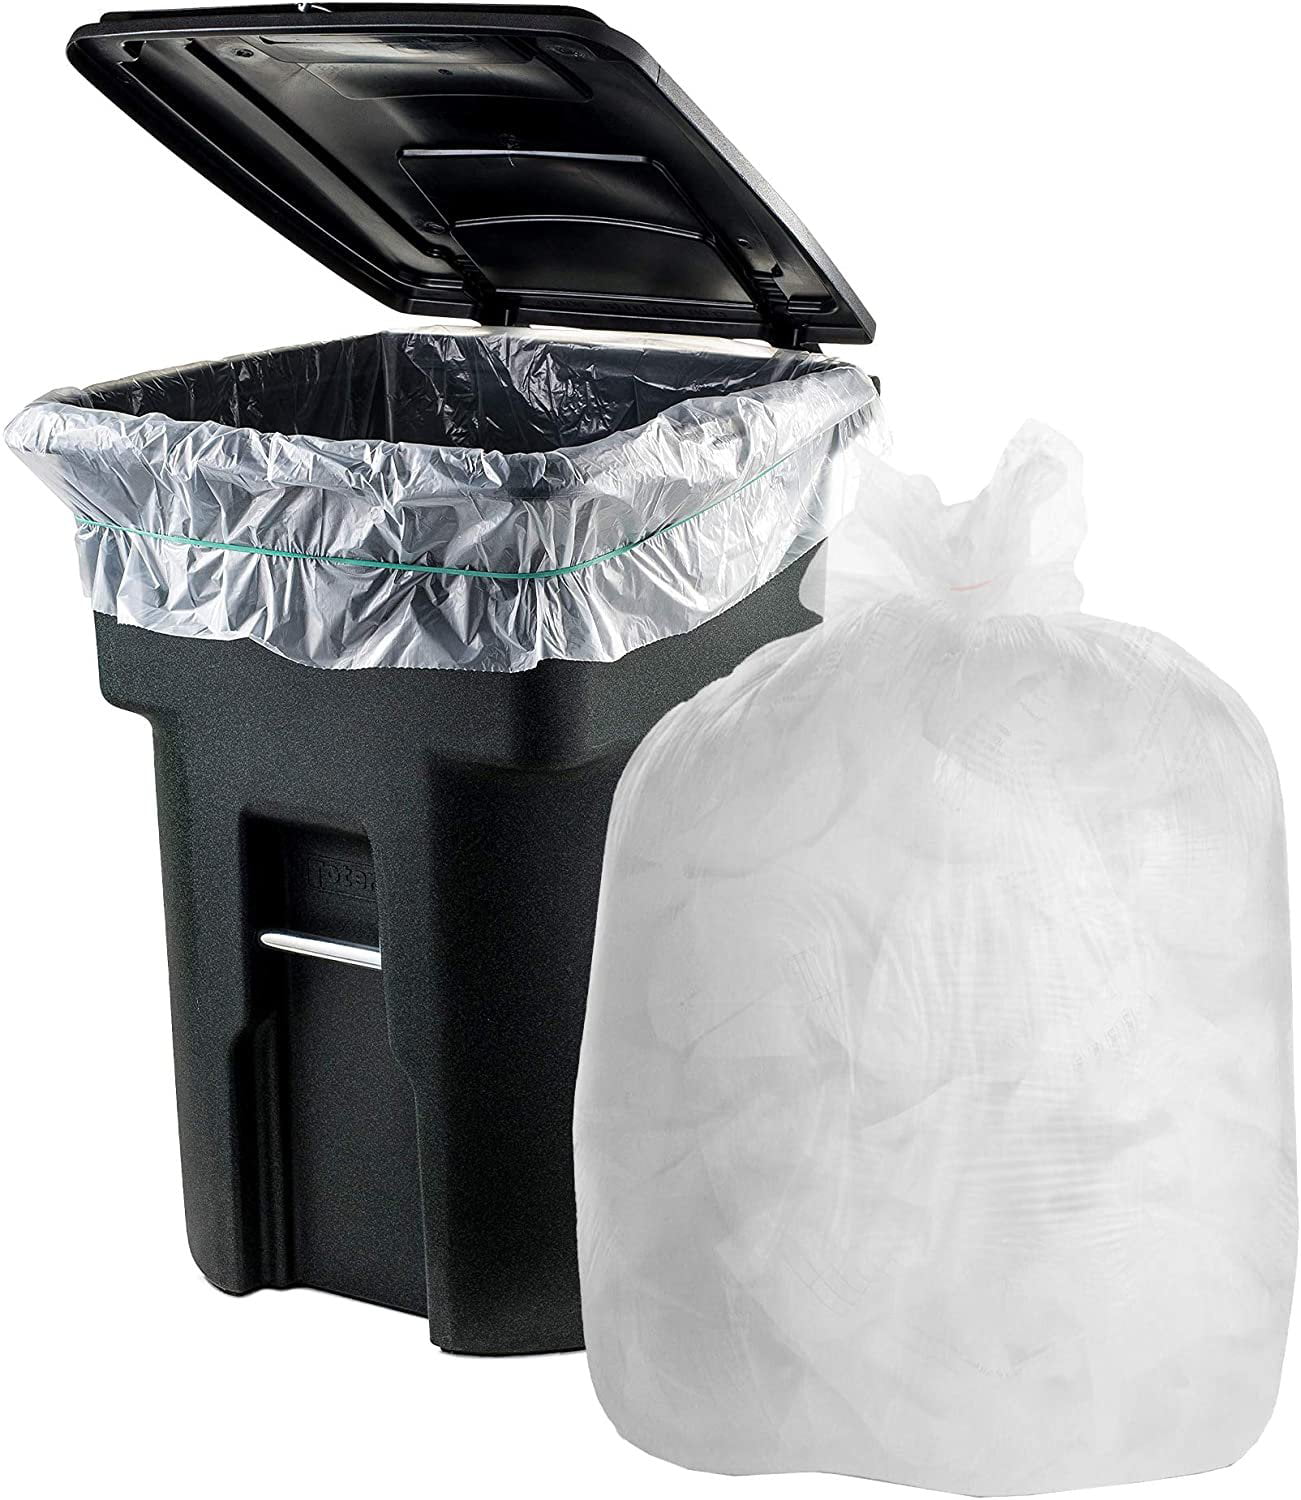 Trash Bags Janitorial High Density Can Liner In A Variety Of Places 100/Bag 